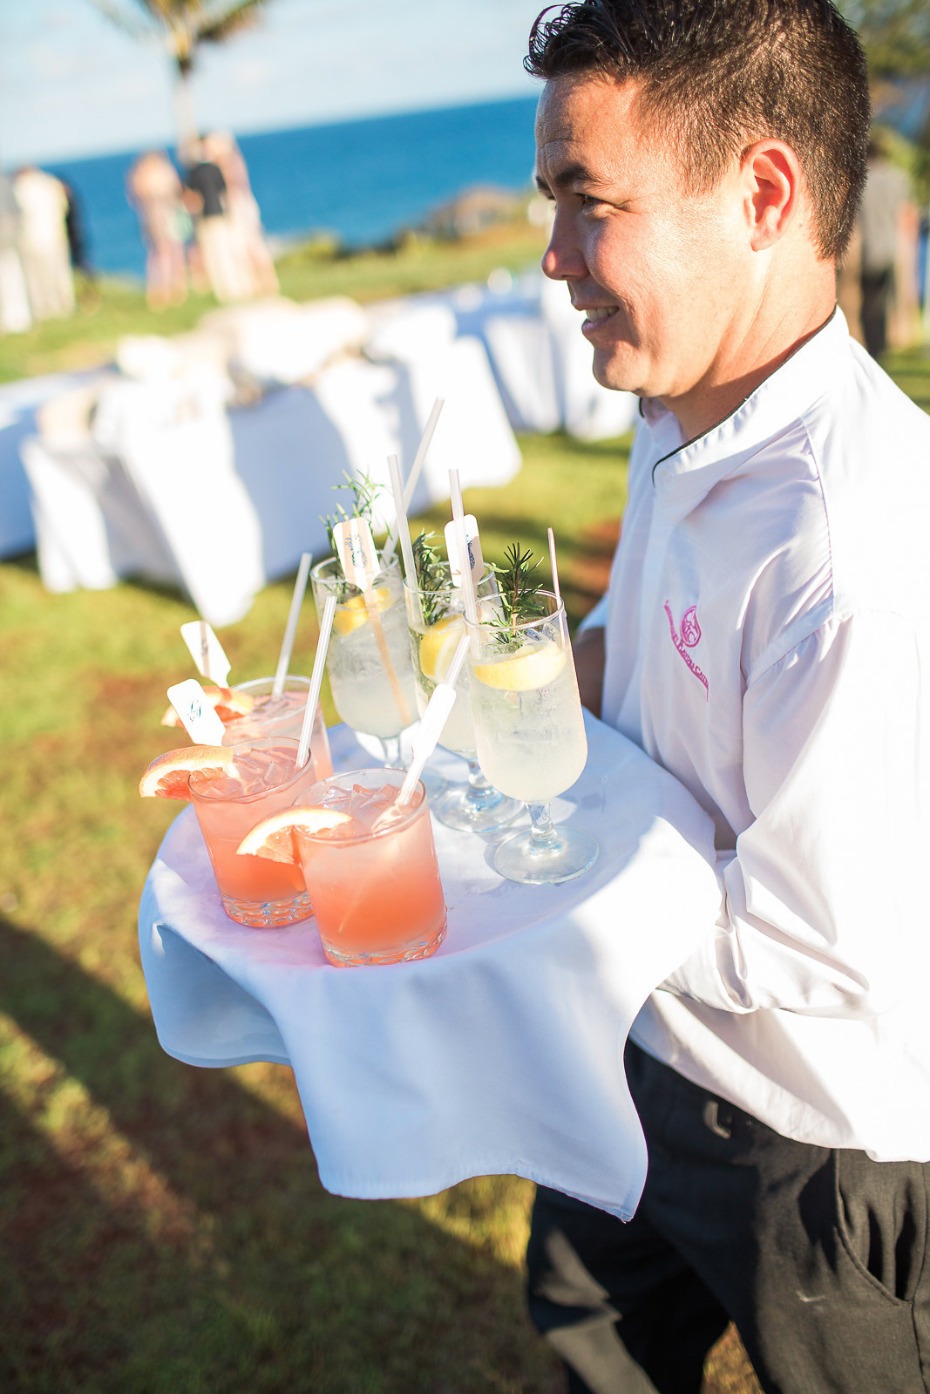 Signature cocktails for guests